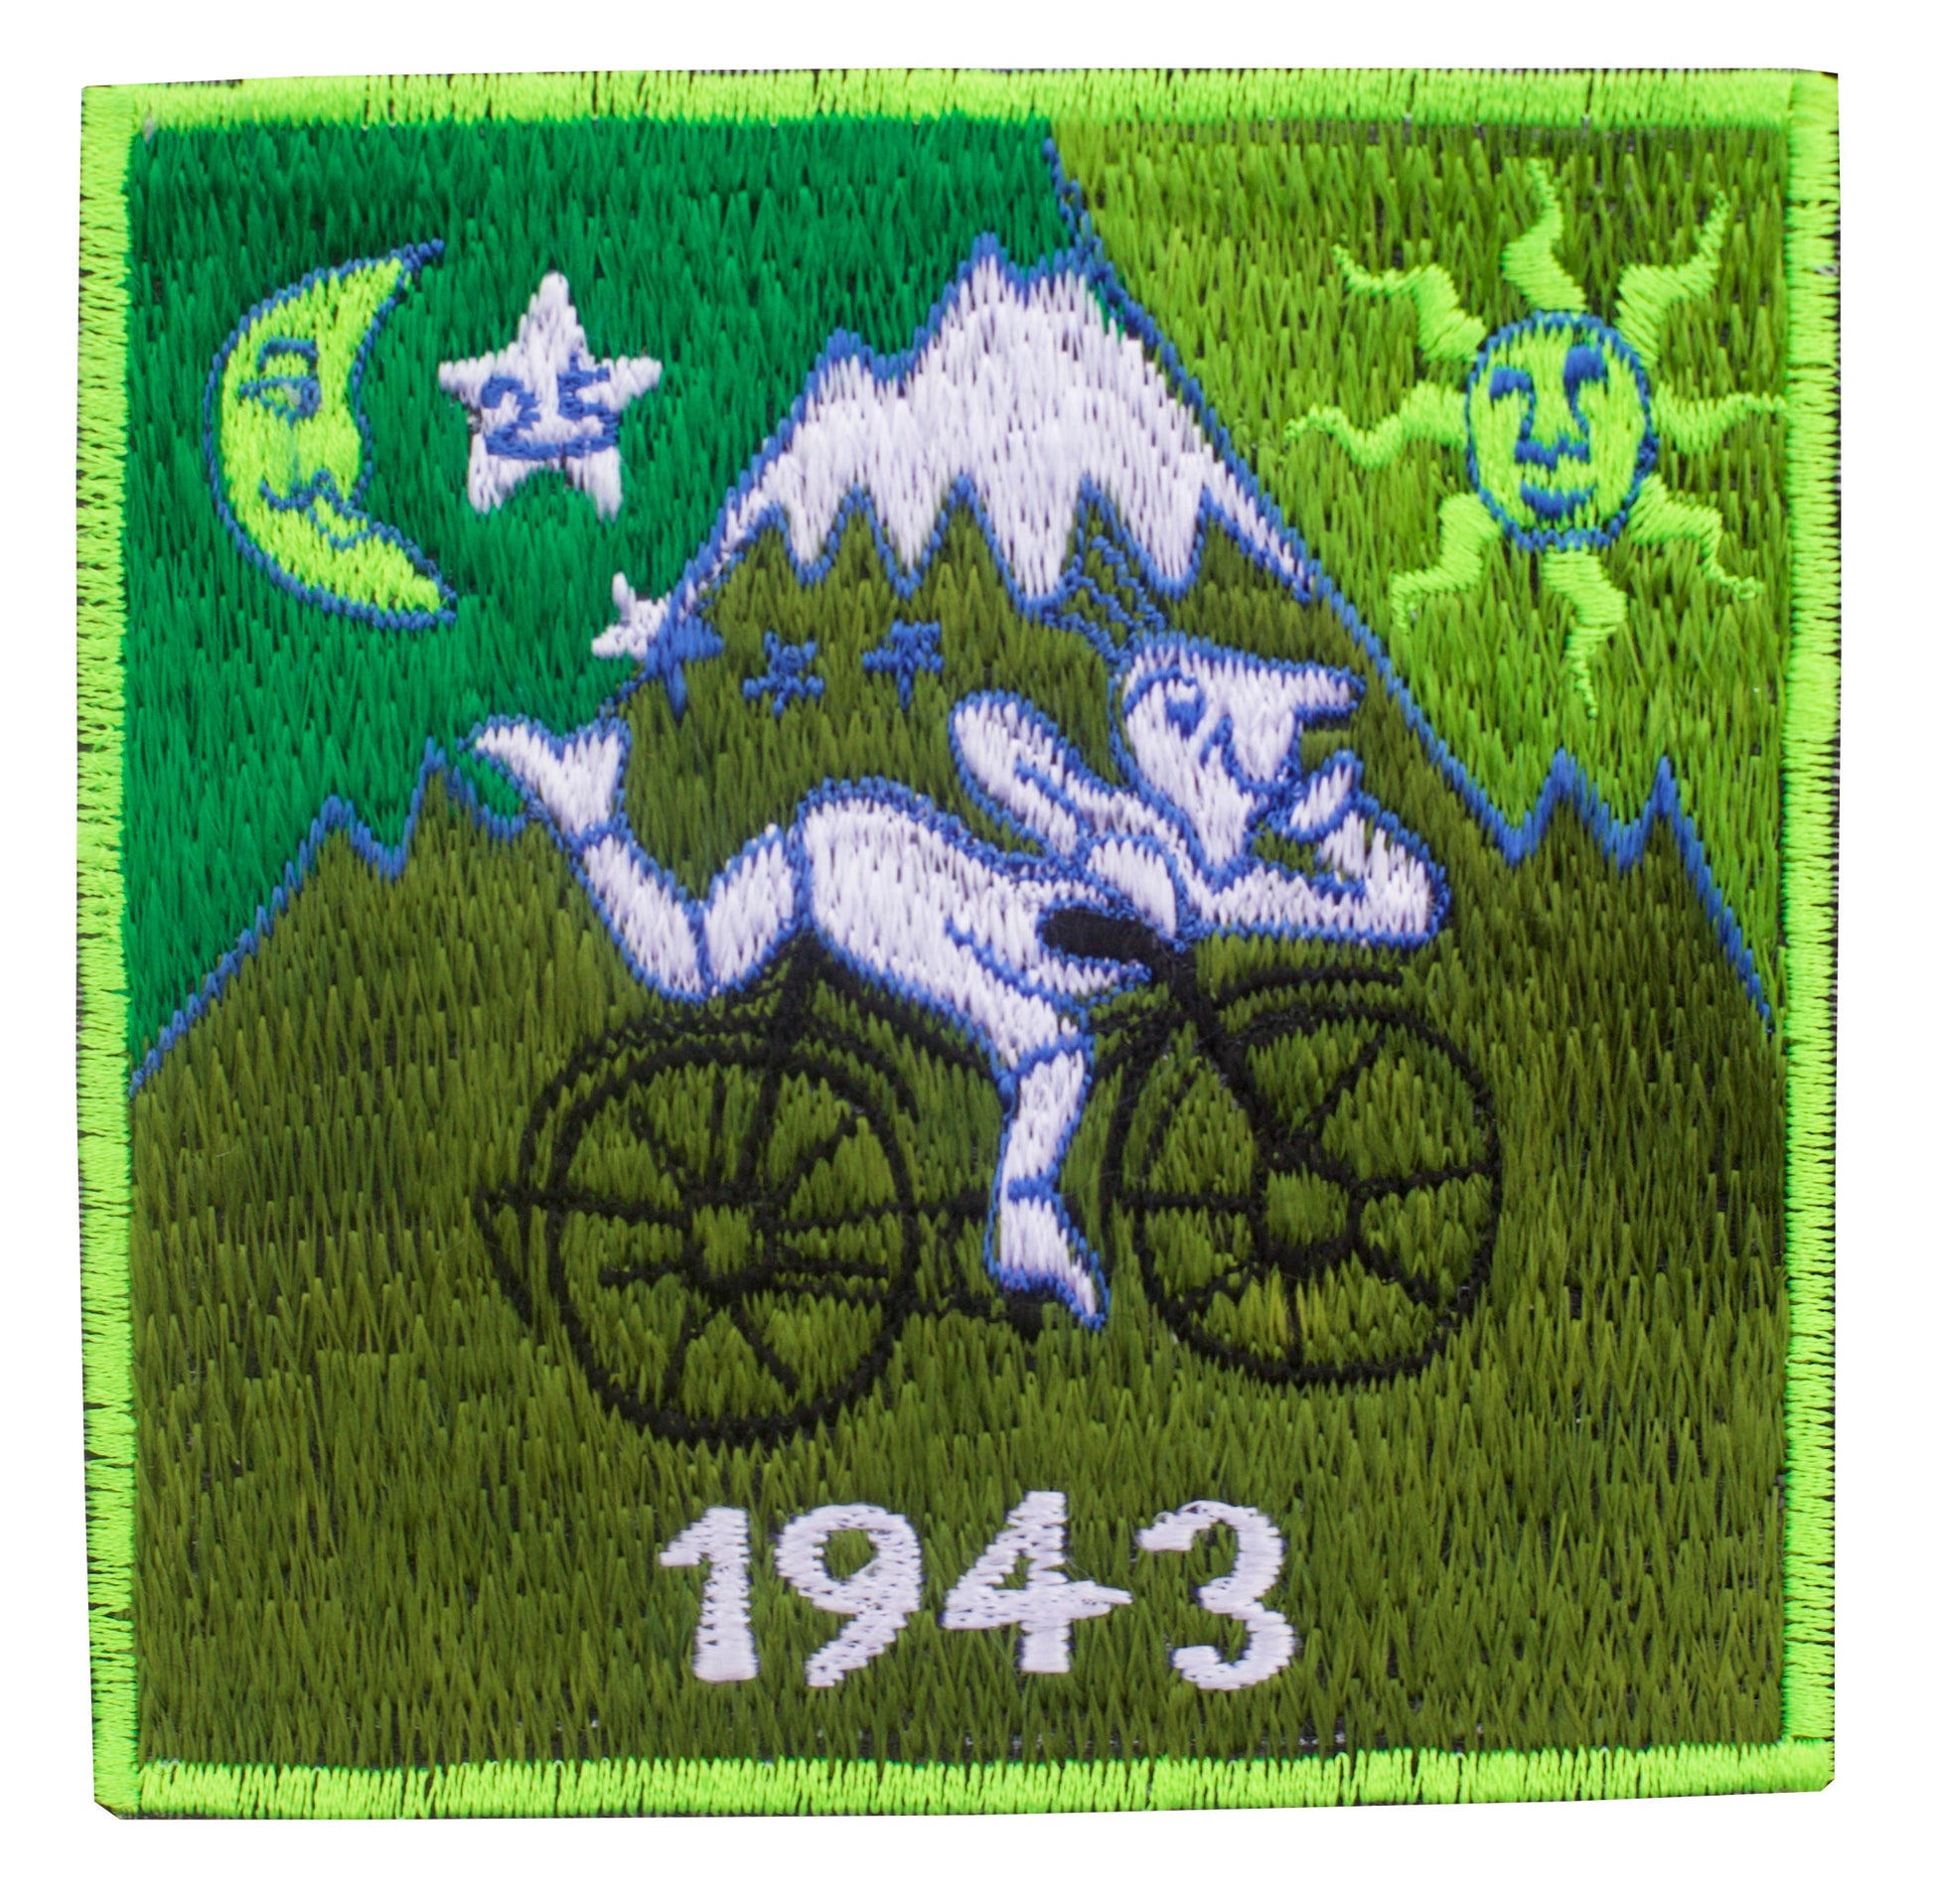 Small Green Bicycle Day LSD Patch Albert Hofmann 1943 Burning Man Psychedelic Acid Trip Hippie Visionary Drug Cosmic Healing Medicine